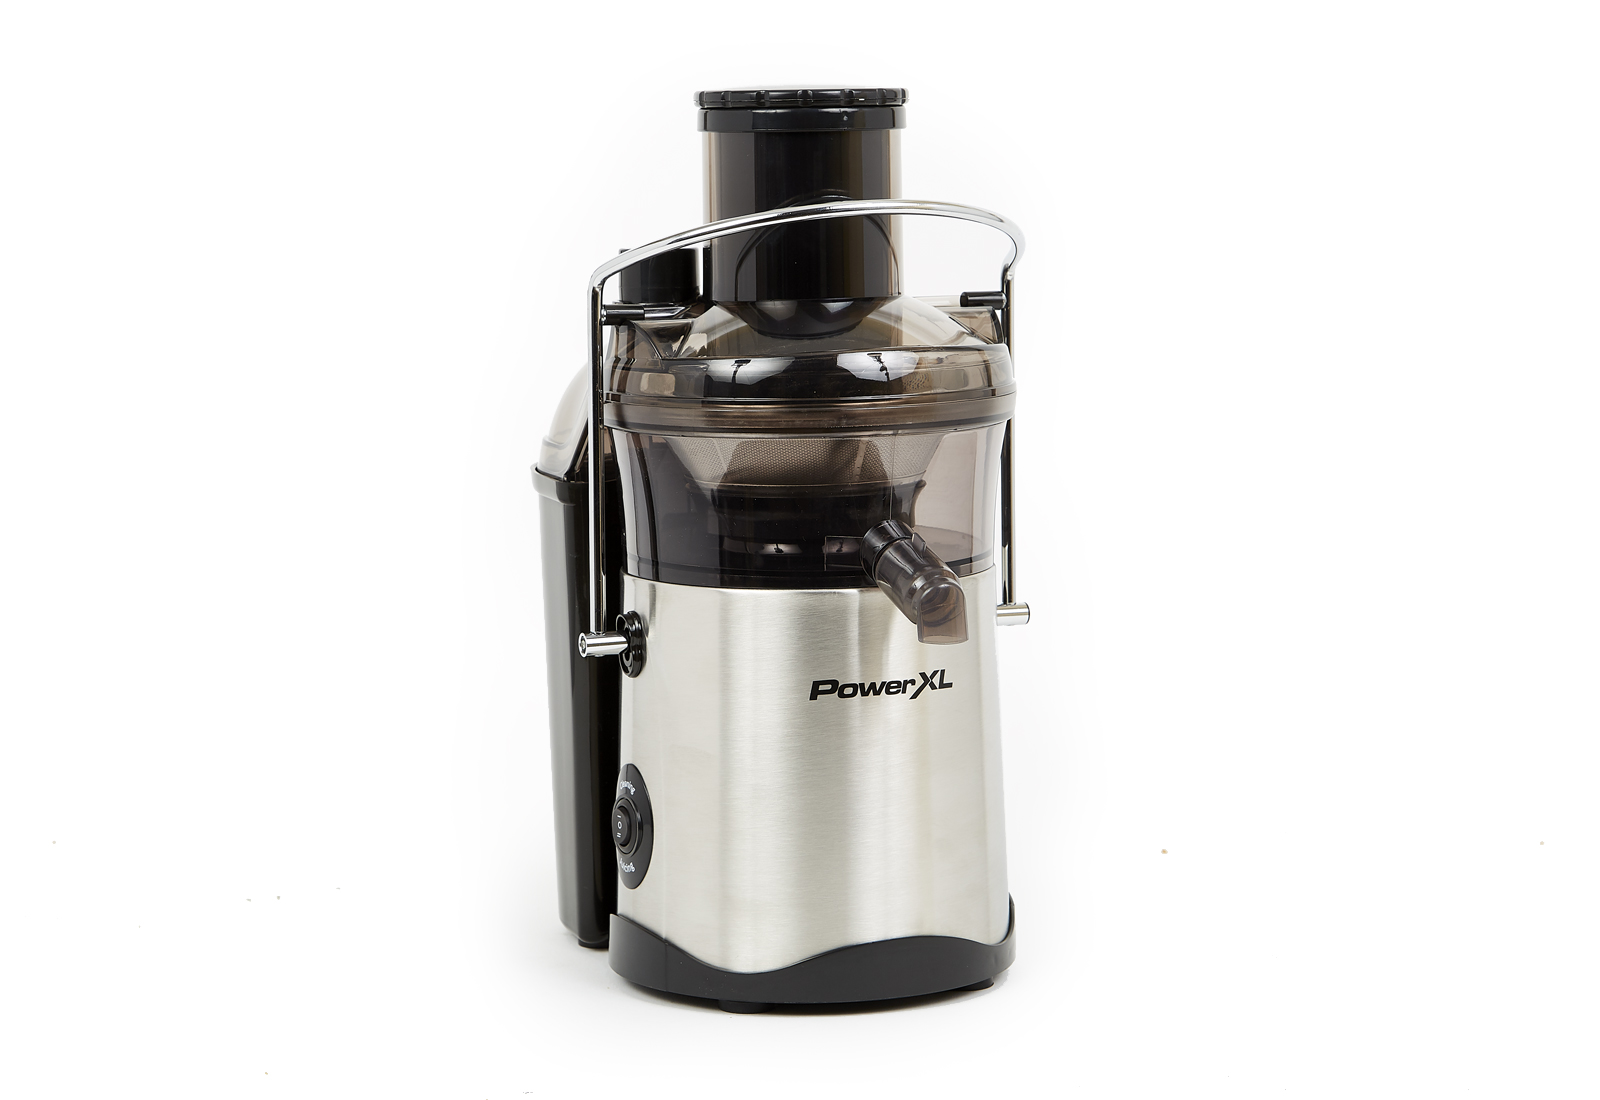 PowerXL Self-Cleaning Juicer Plus Product Image